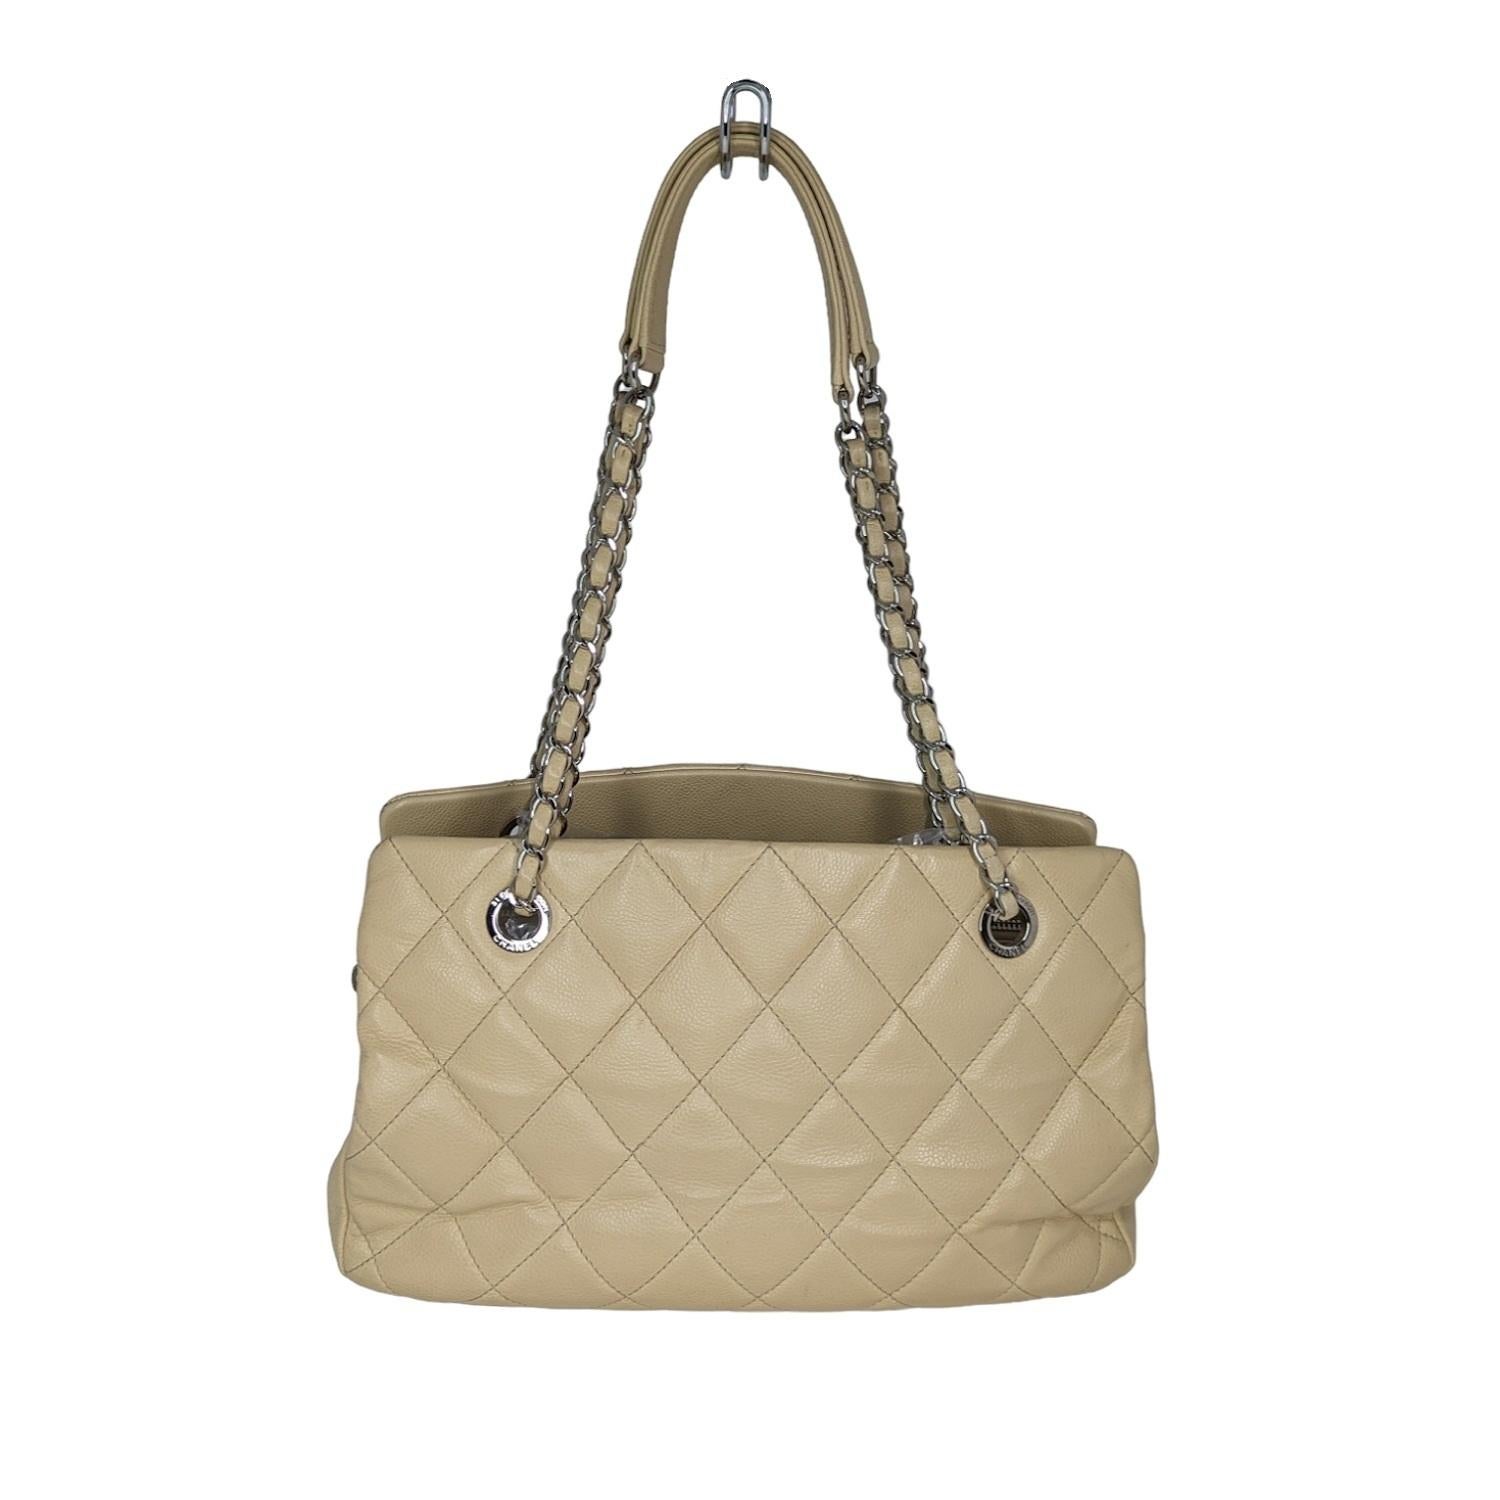 This Chanel Timeless Classic Caviar Quilted Tote is crafted from light beige quilted caviar leather. It features leather woven chain straps with leather shoulder pads, protective base studs, and silver-toned hardware. The interior is a camel-colored